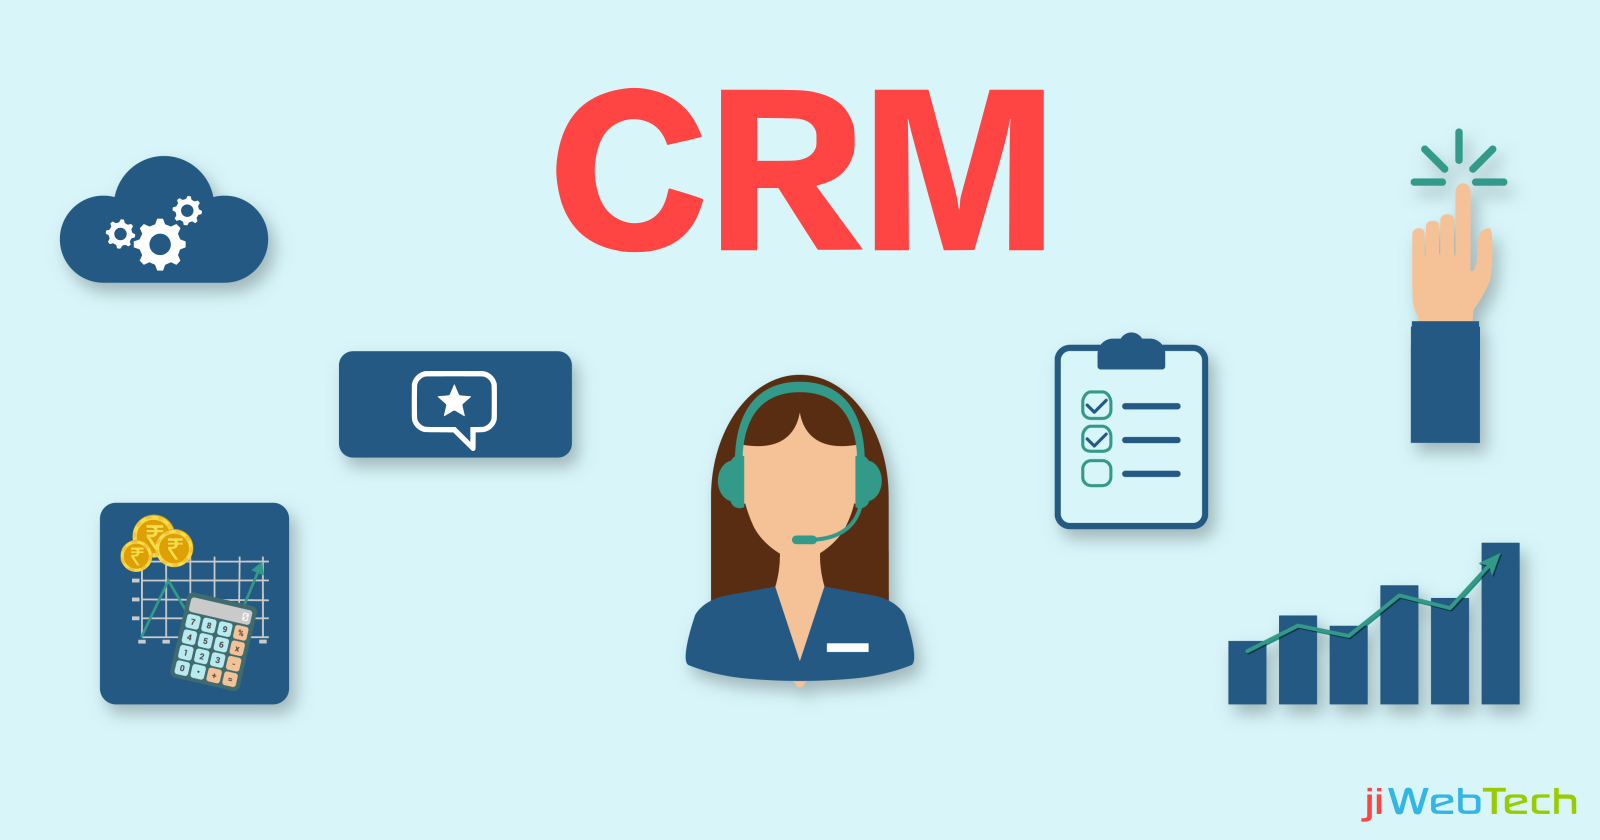 Be Aware and Cautious While You Choose Your CRM!